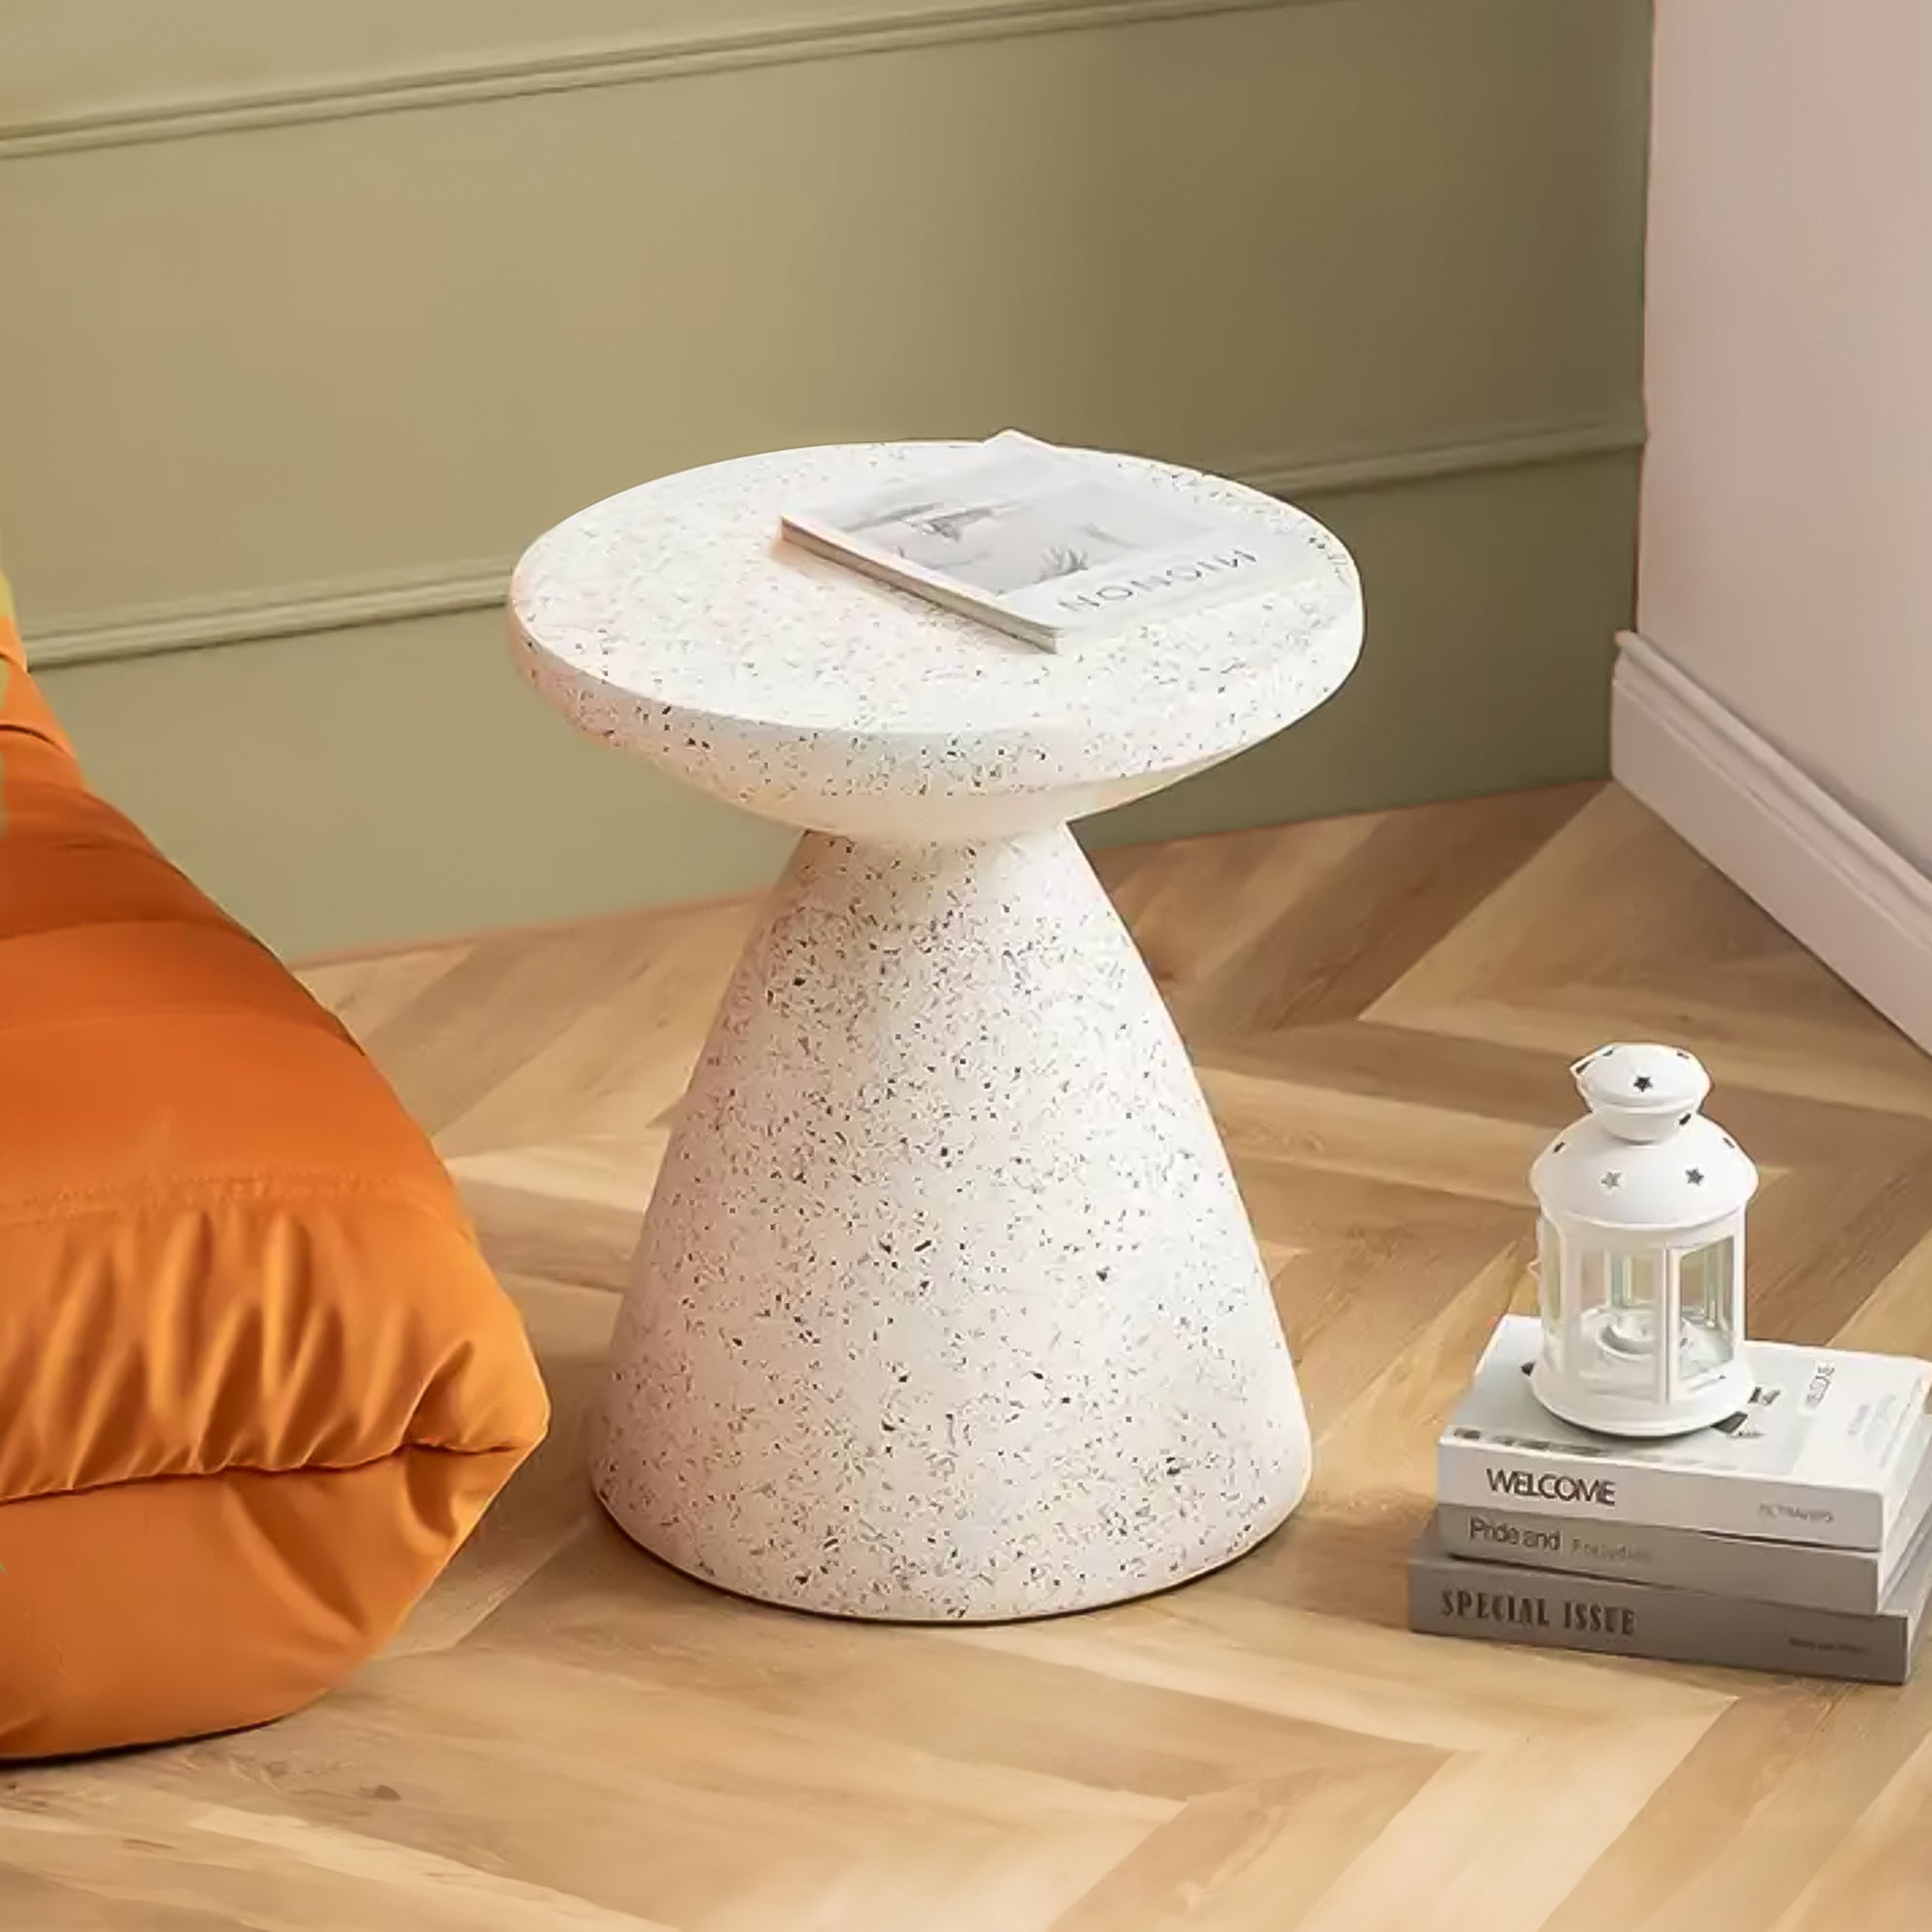 Round Coffee Accent Side Table